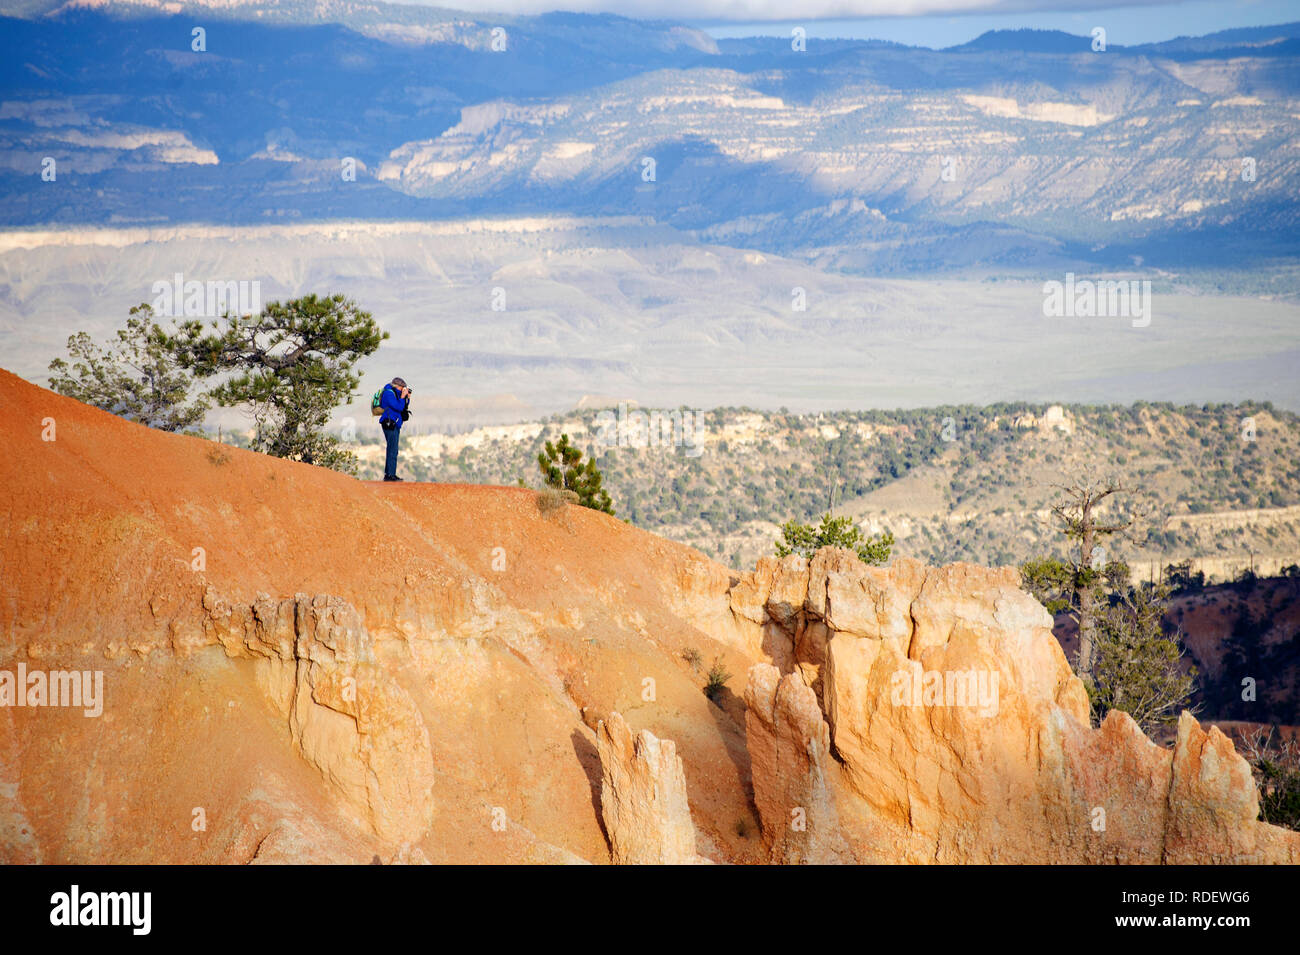 Hiker taking a picture at Bryce Canyon National Park, Utah, USA. Stock Photo